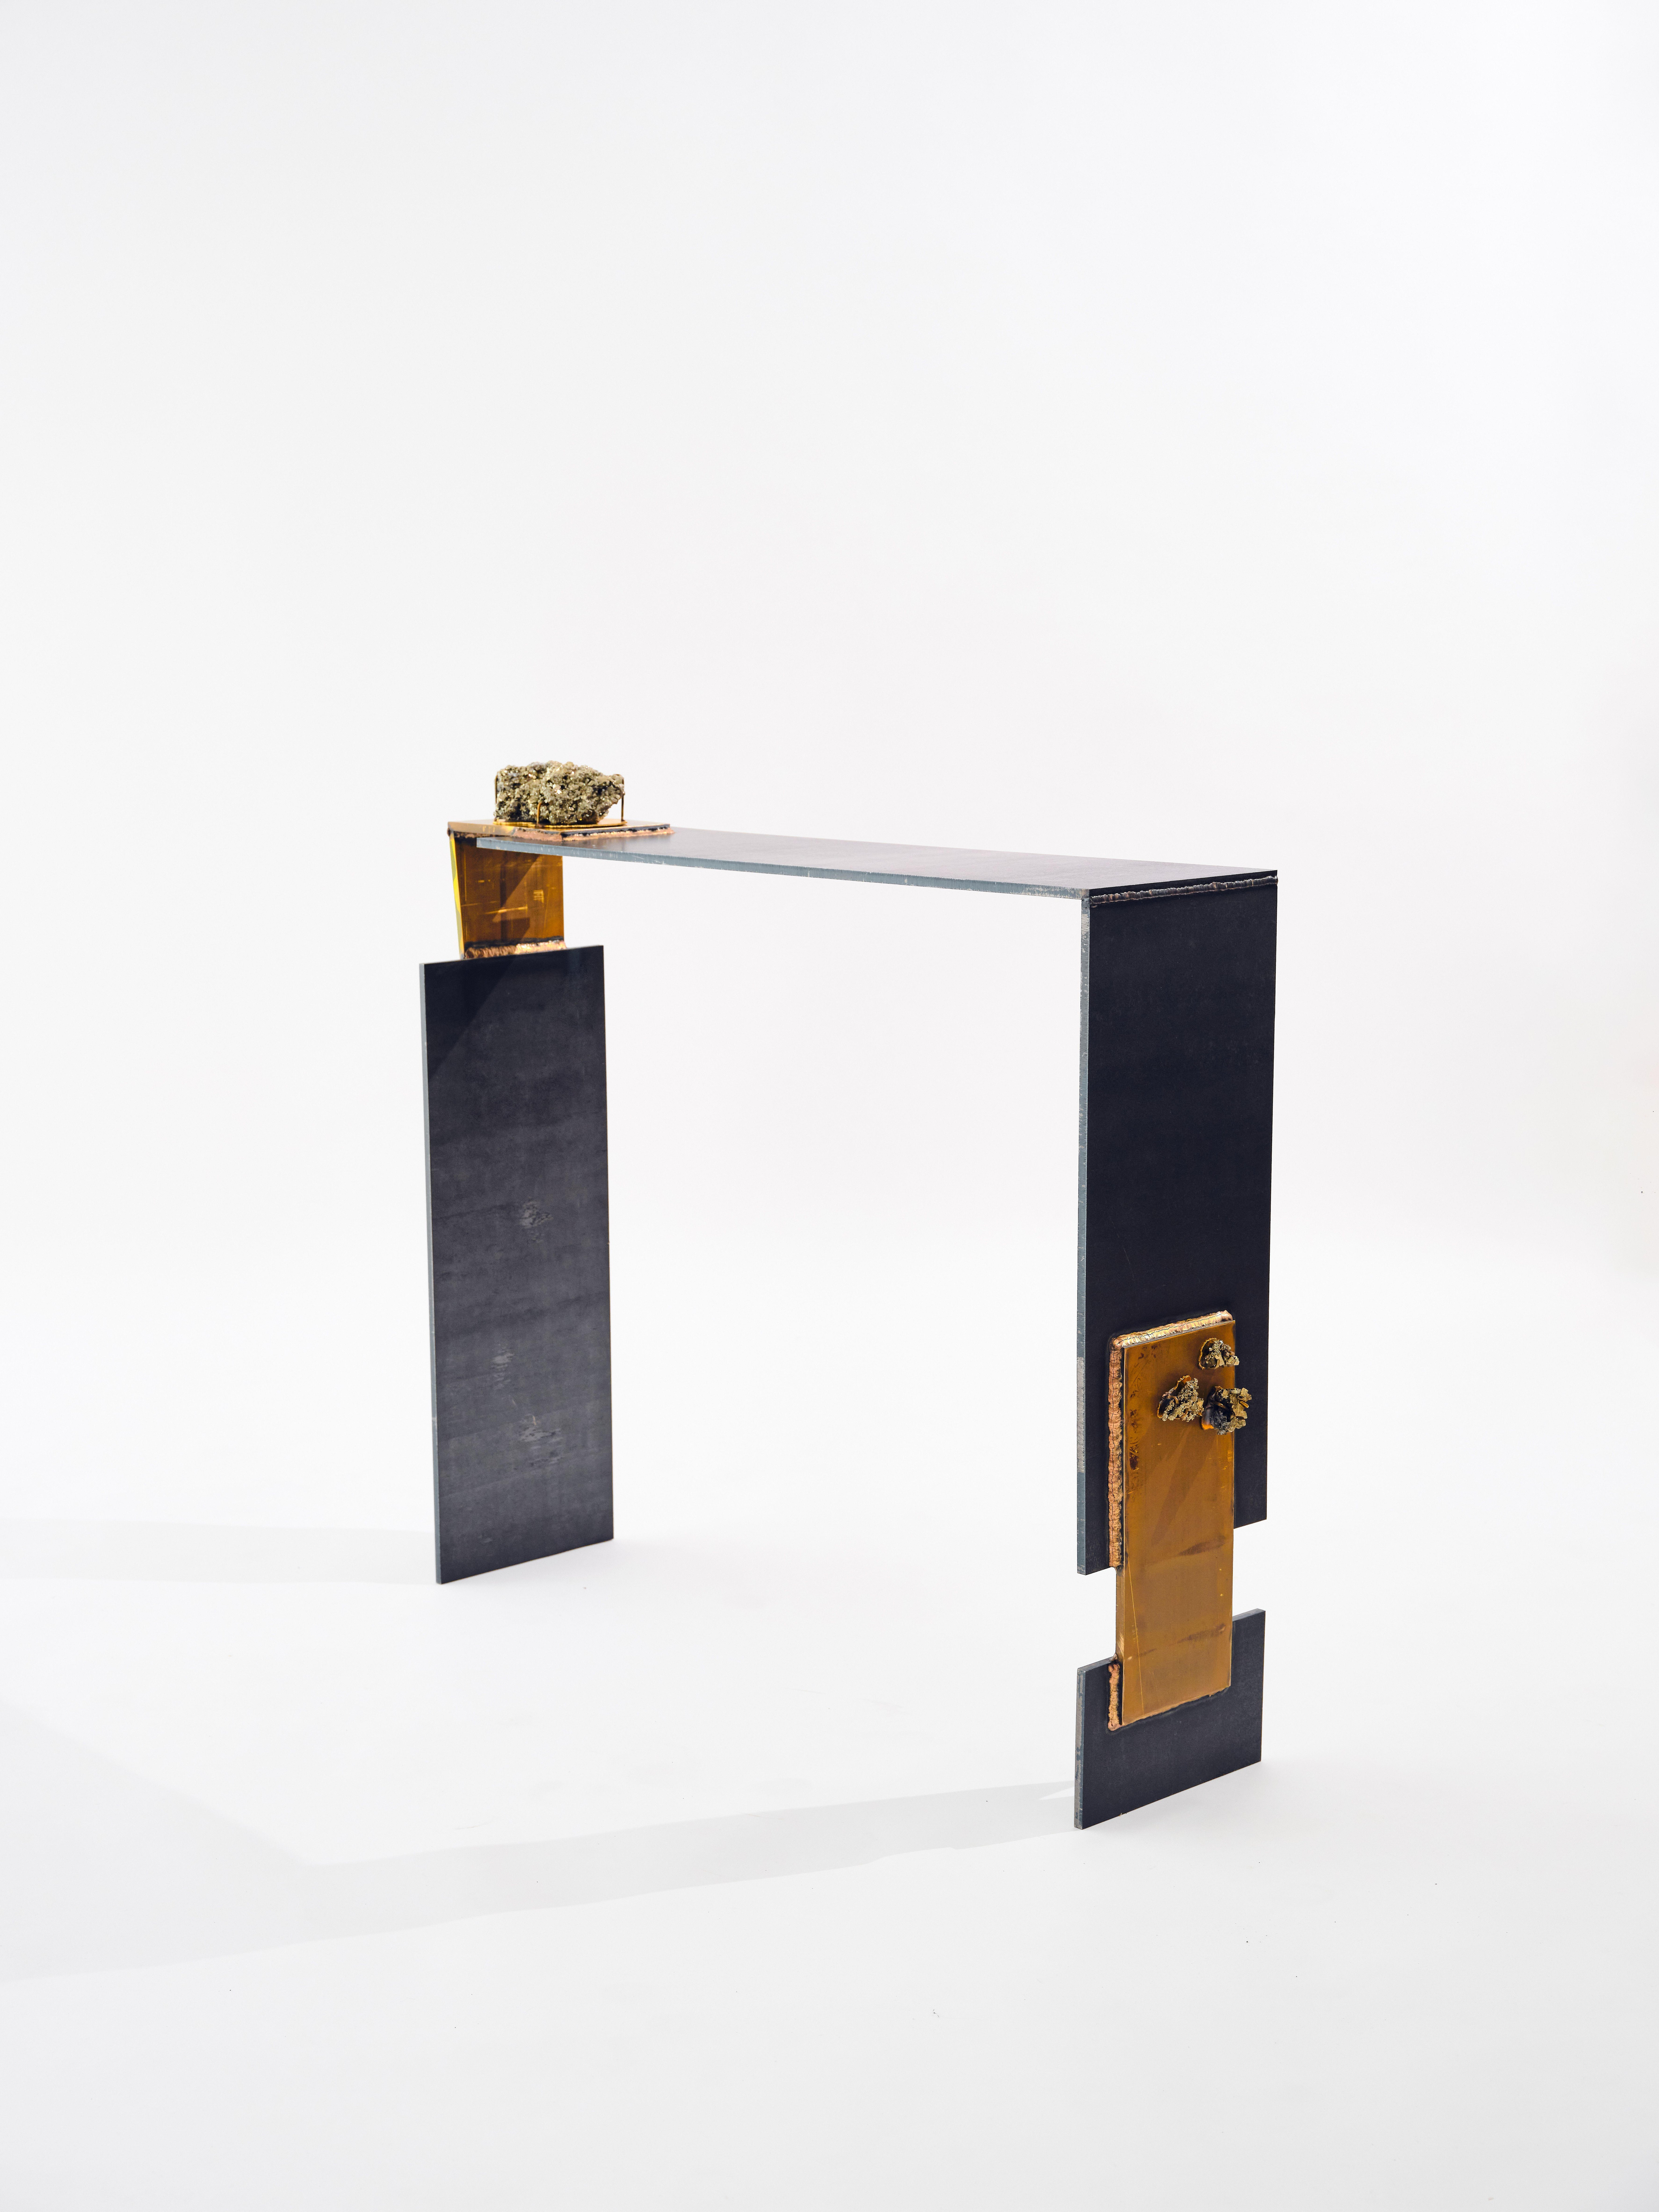 Pyrite Consolte table 2 by Brajak Vitberg
Dimensions: D 145 x W 25 x H 85 cm
Materials: Metal, Brass, Natural Pyrite Minerals

Bijelic and Brajak are two architects from Ljubljana, Slovenia.
They are striving to design craft elements and make